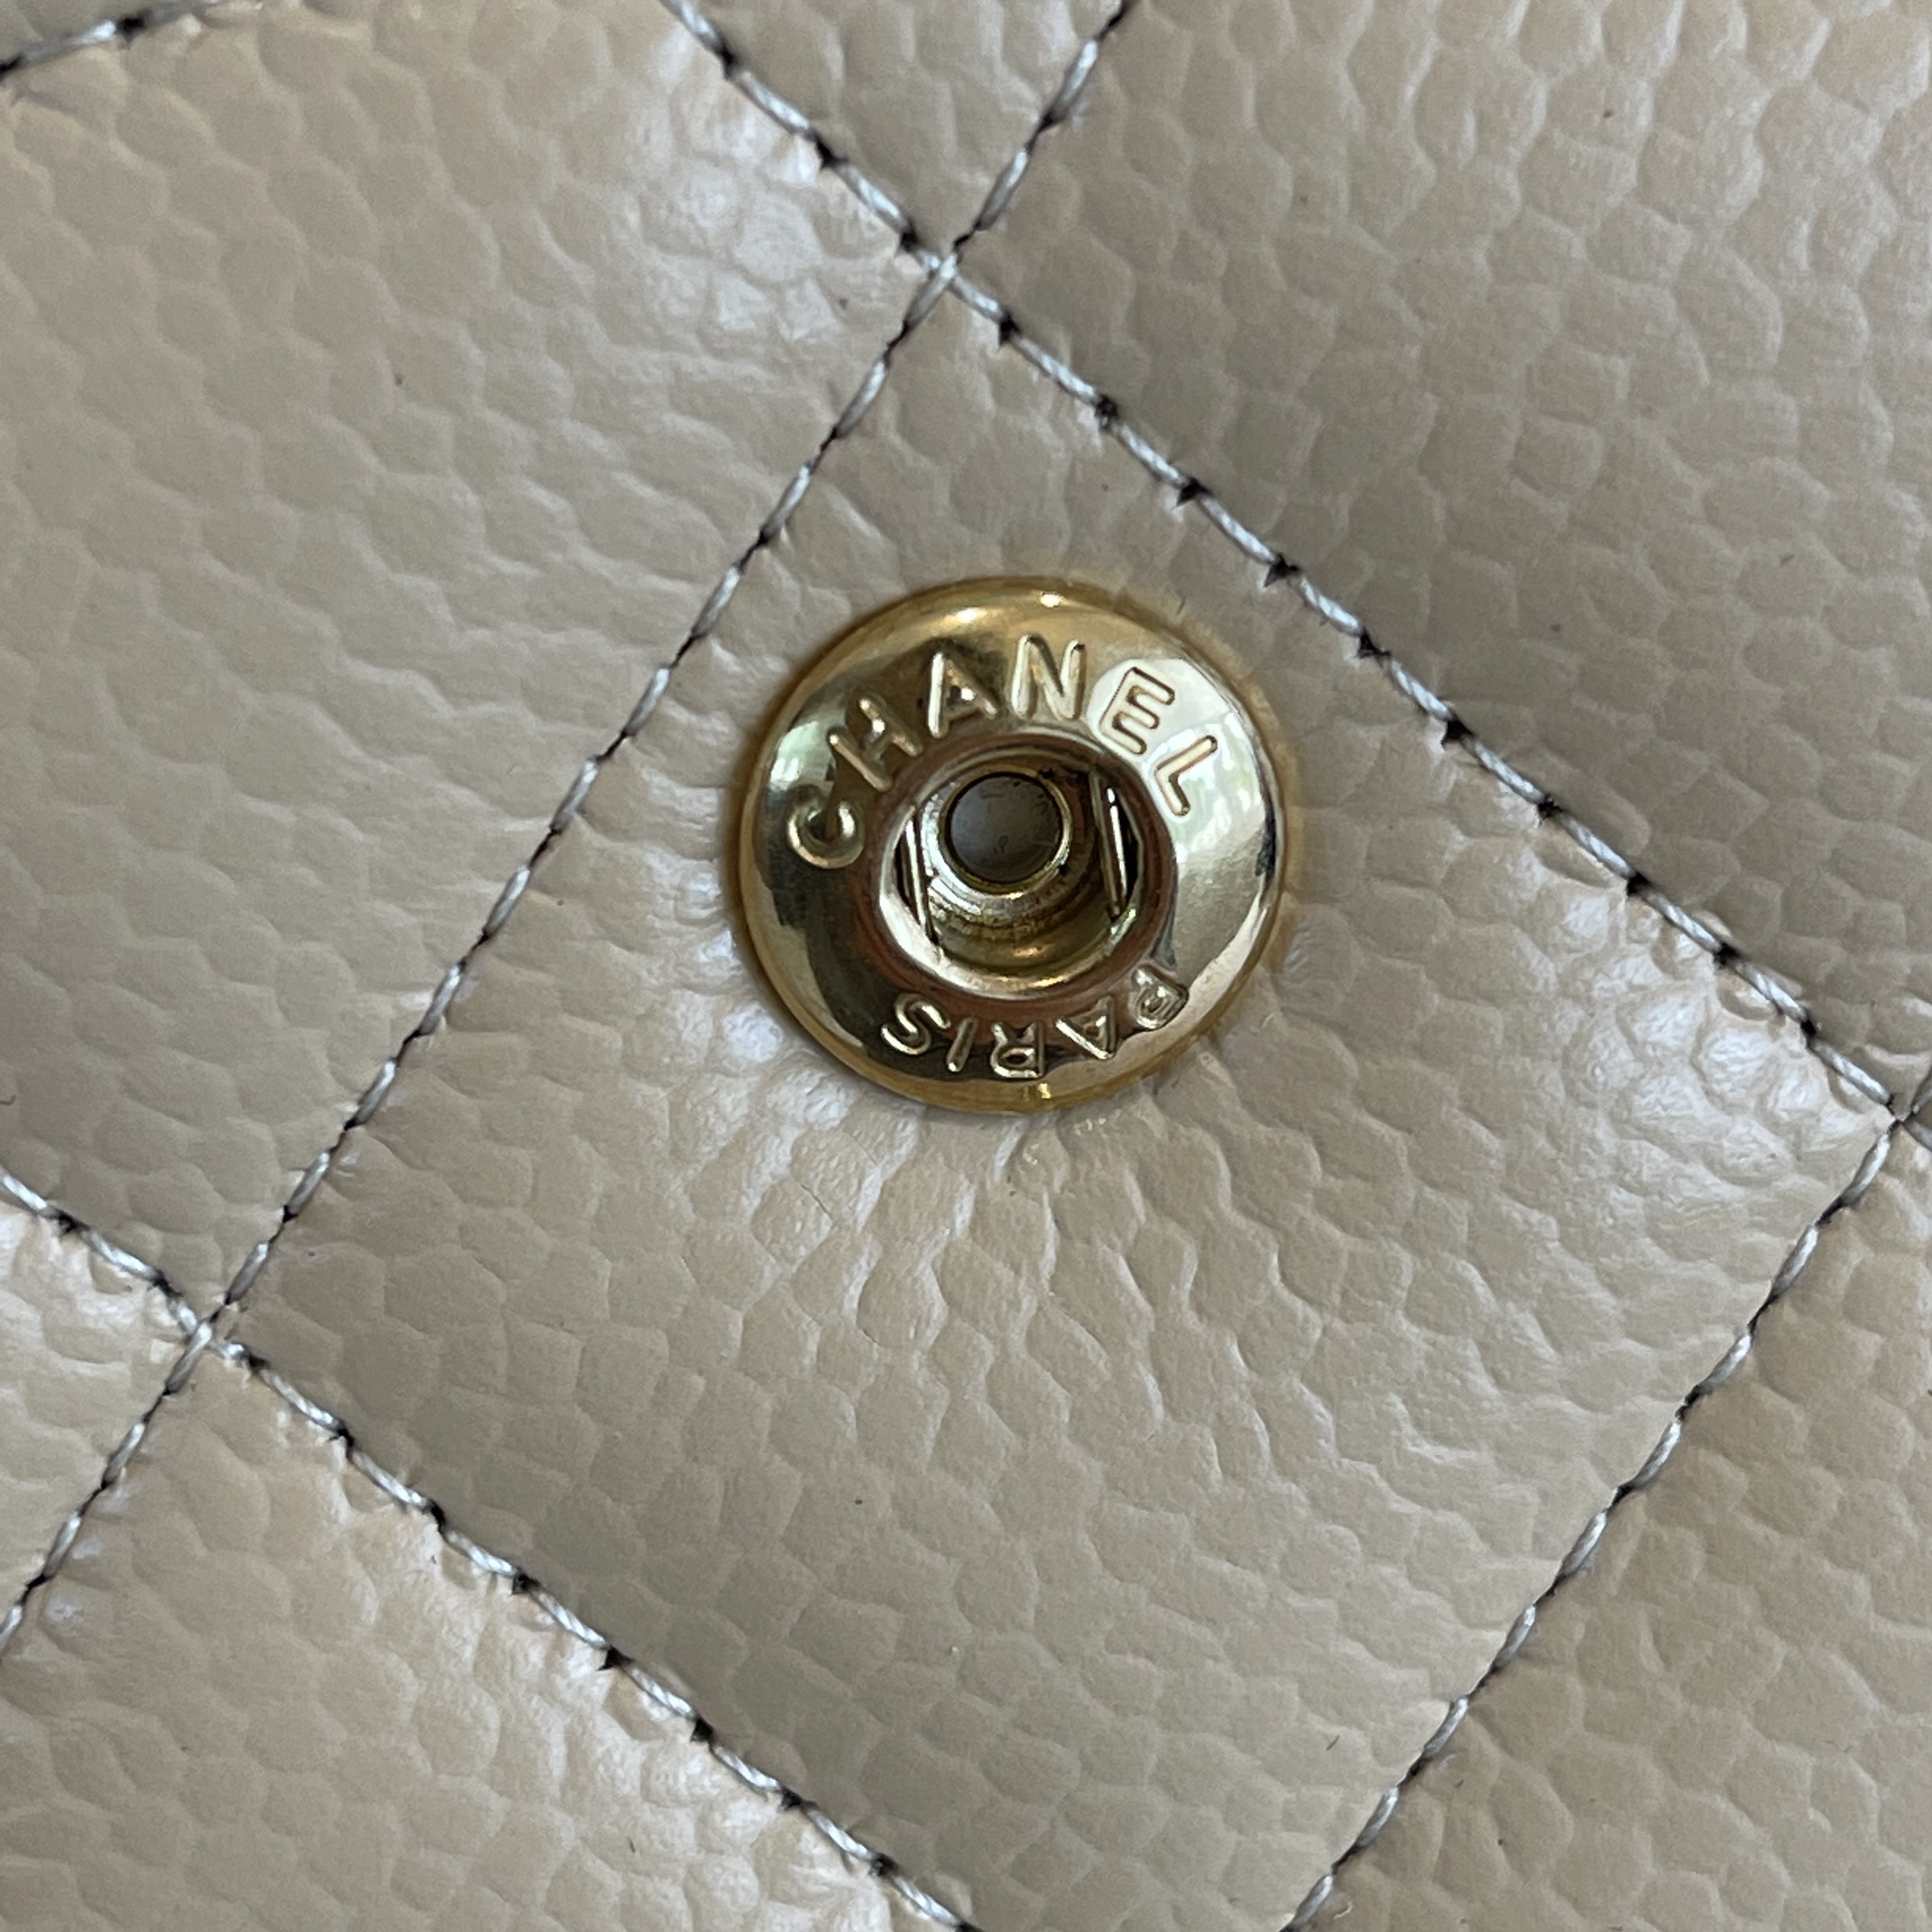 Chanel Caviar Quilted Jumbo Double Flap Beige Gold Hardware